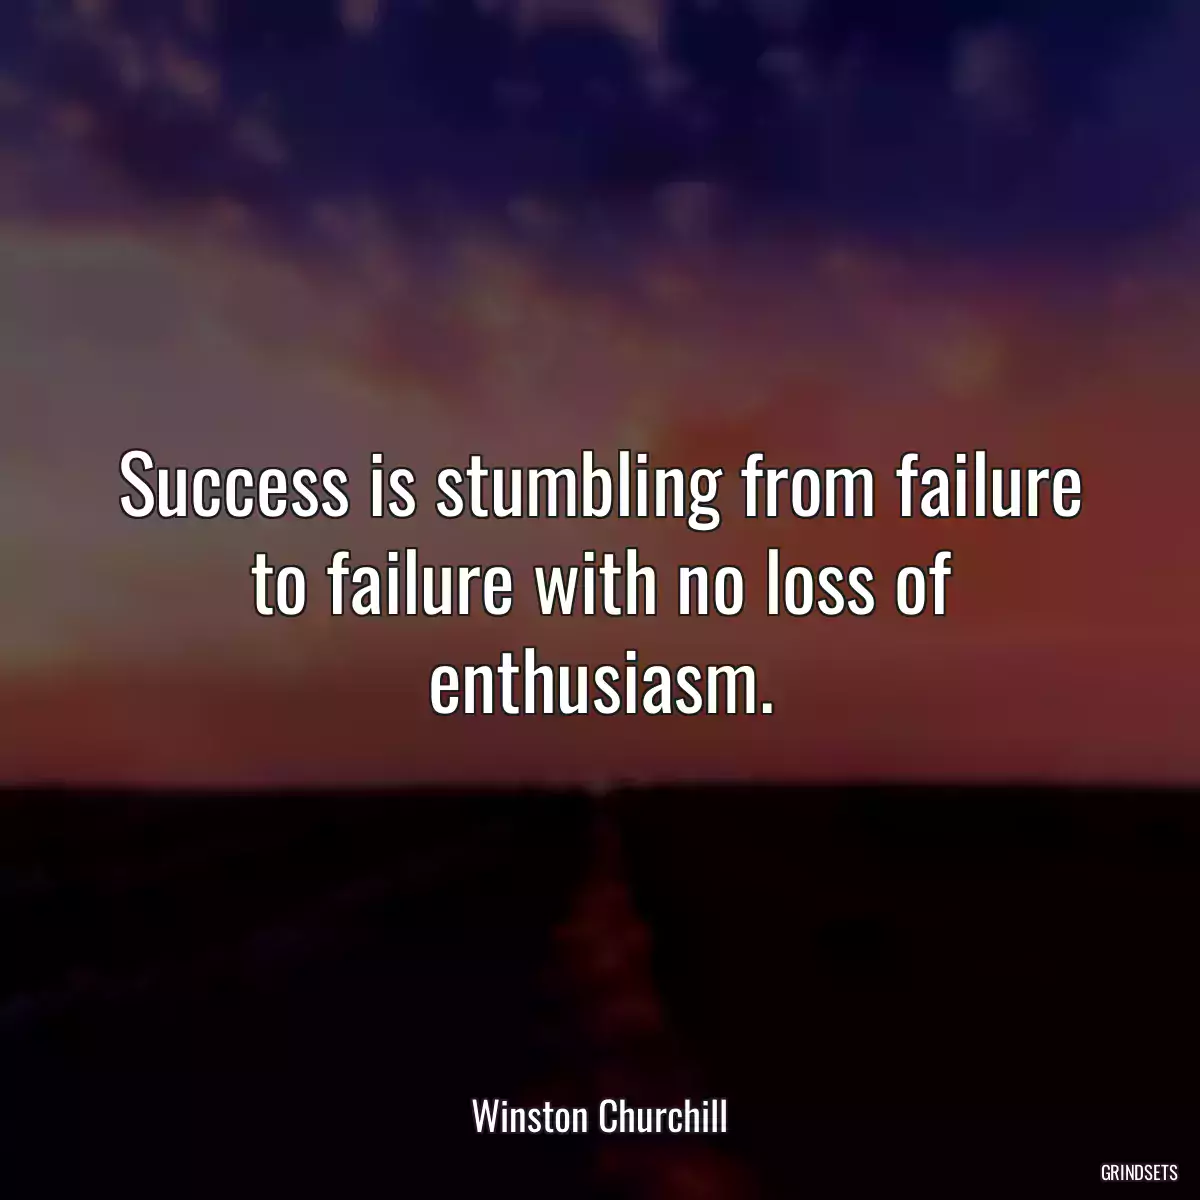 Success is stumbling from failure to failure with no loss of enthusiasm.